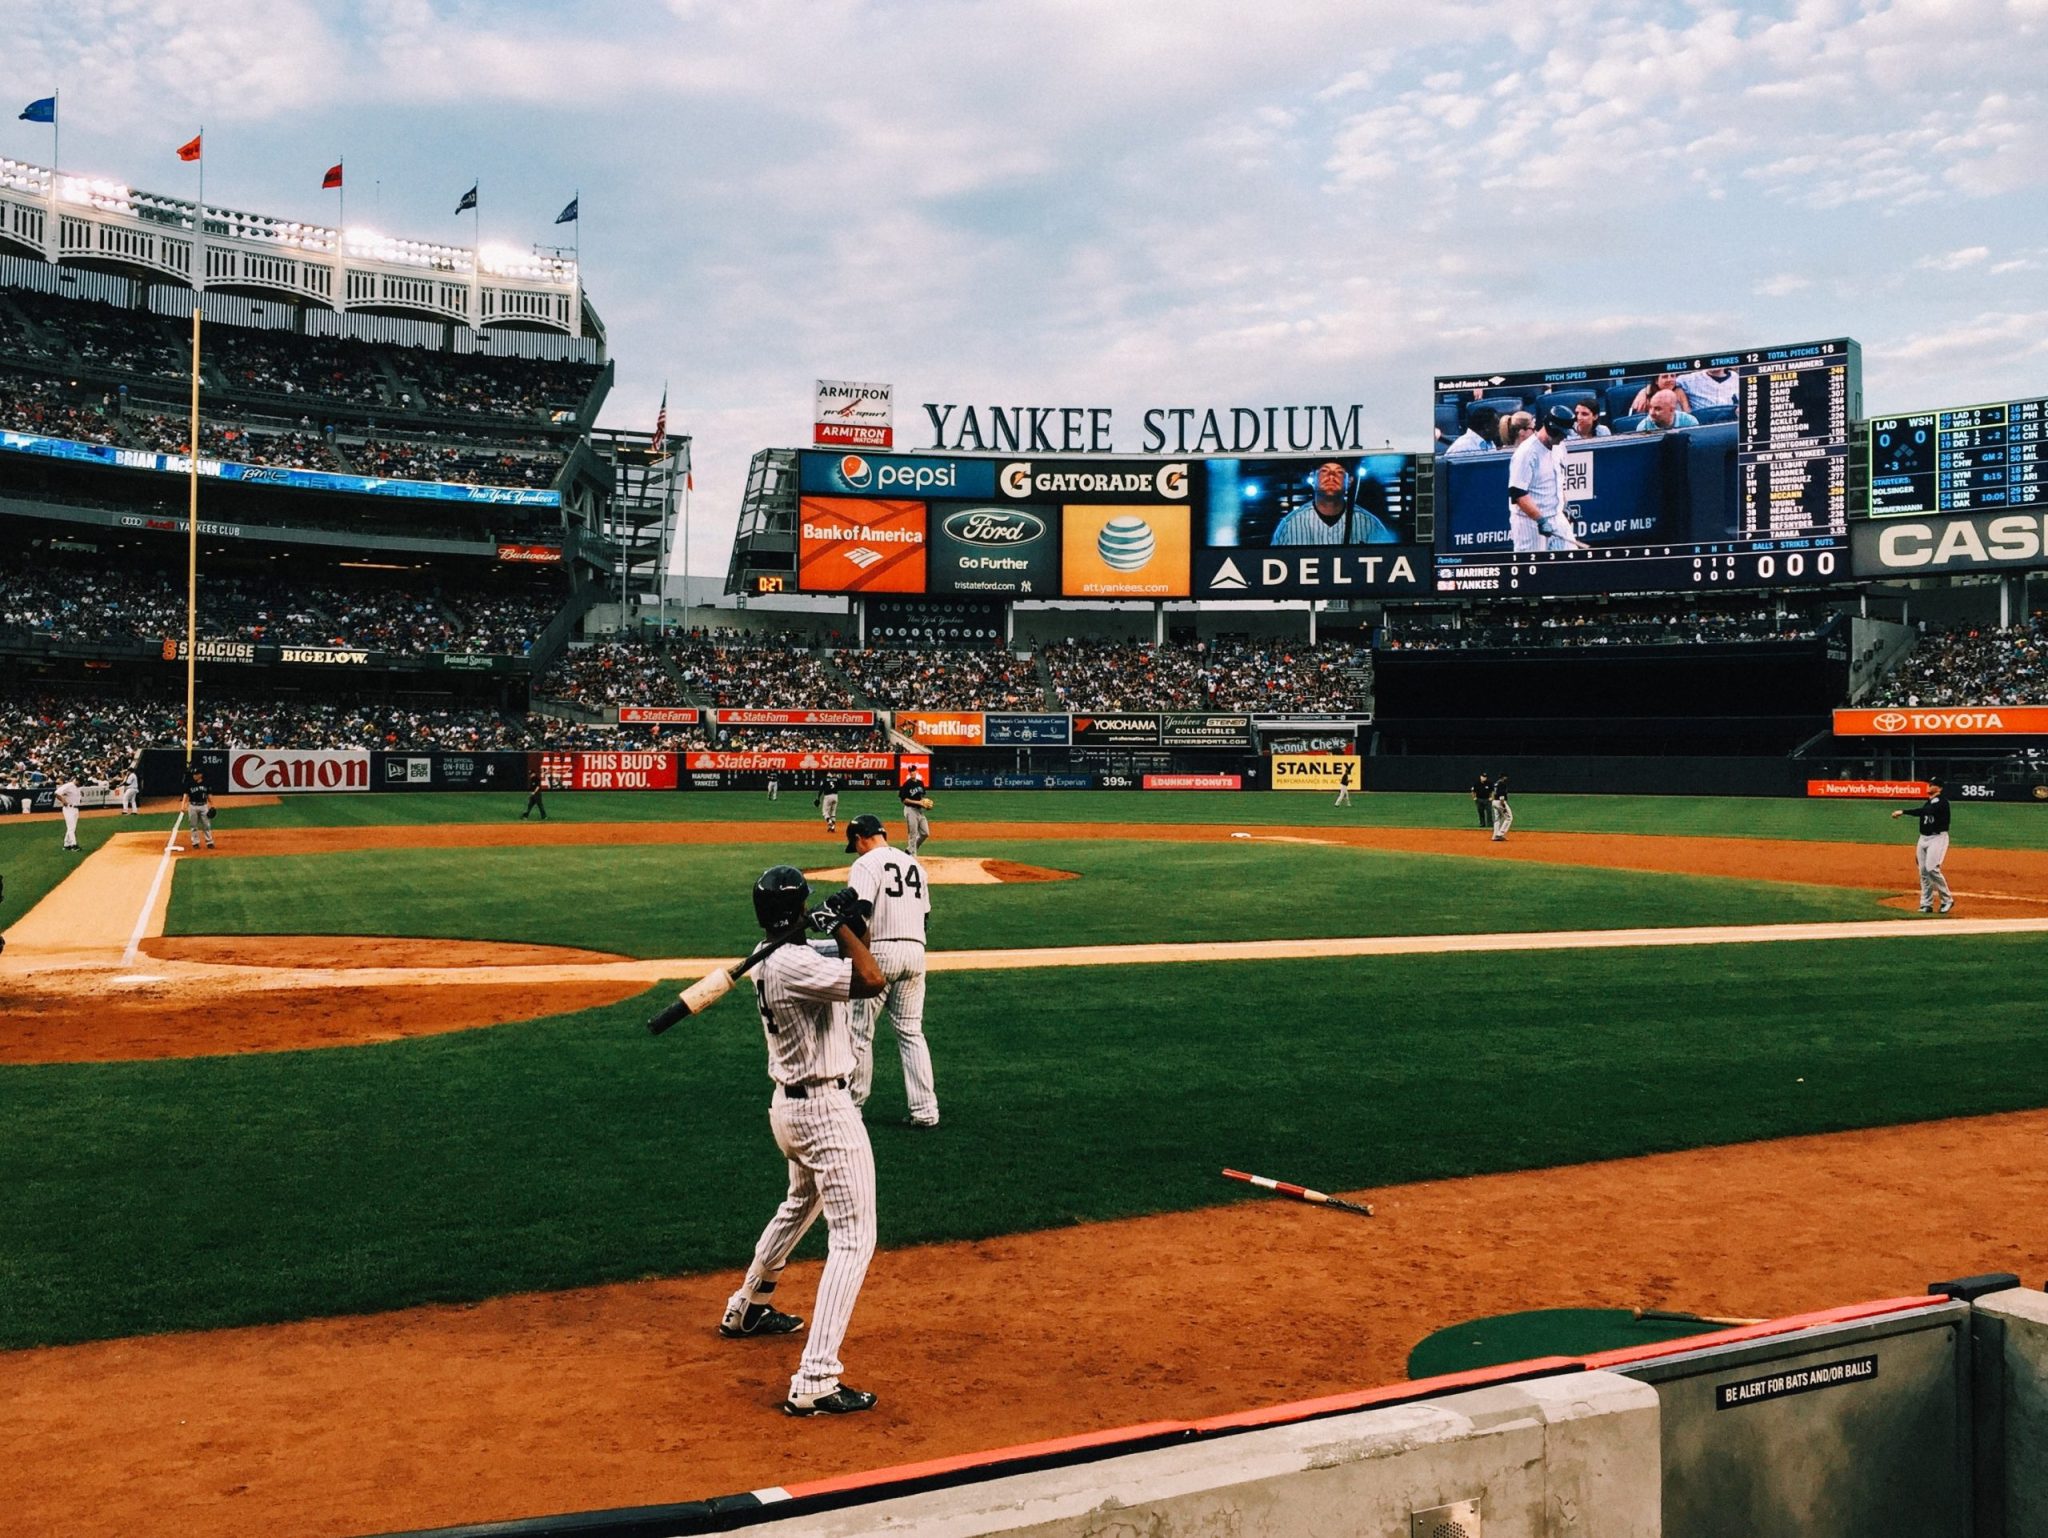 Things to do in NYC: See a Yankee's game